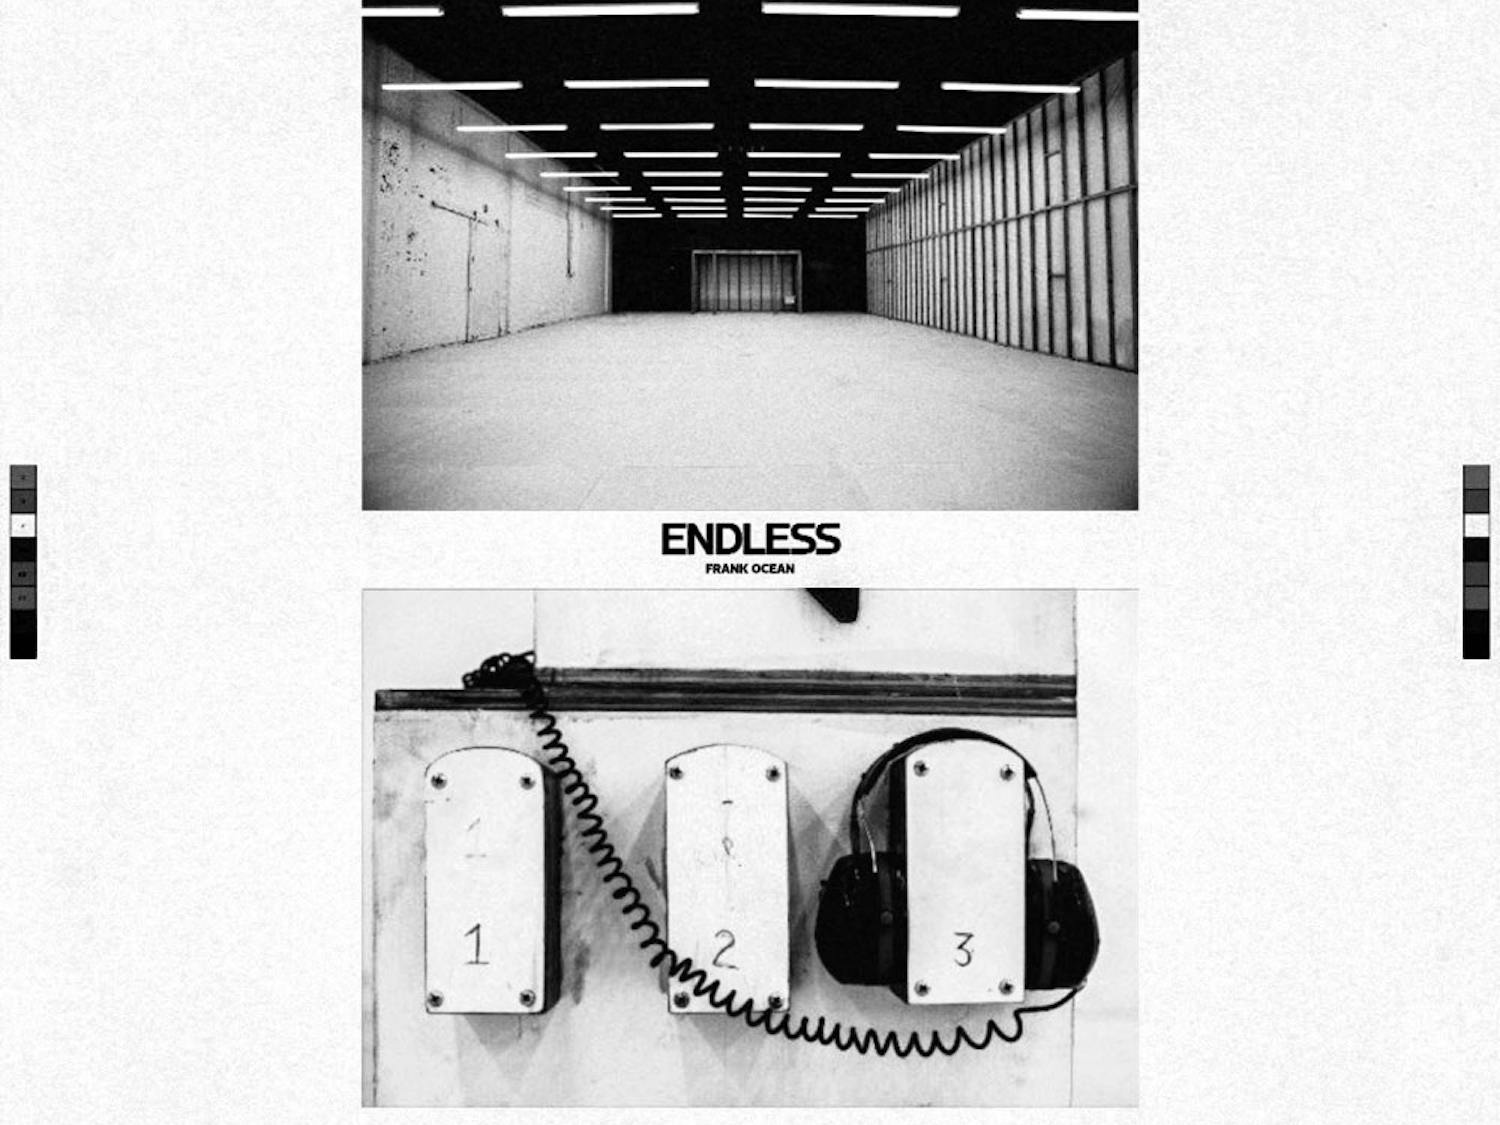 A CD-quality version Frank Ocean’s “Endless” finally hit the Internet on April 9 after physical copies shipped. The high-quality audio shines a light on one of Ocean’s most personal works and gives it new meaning.